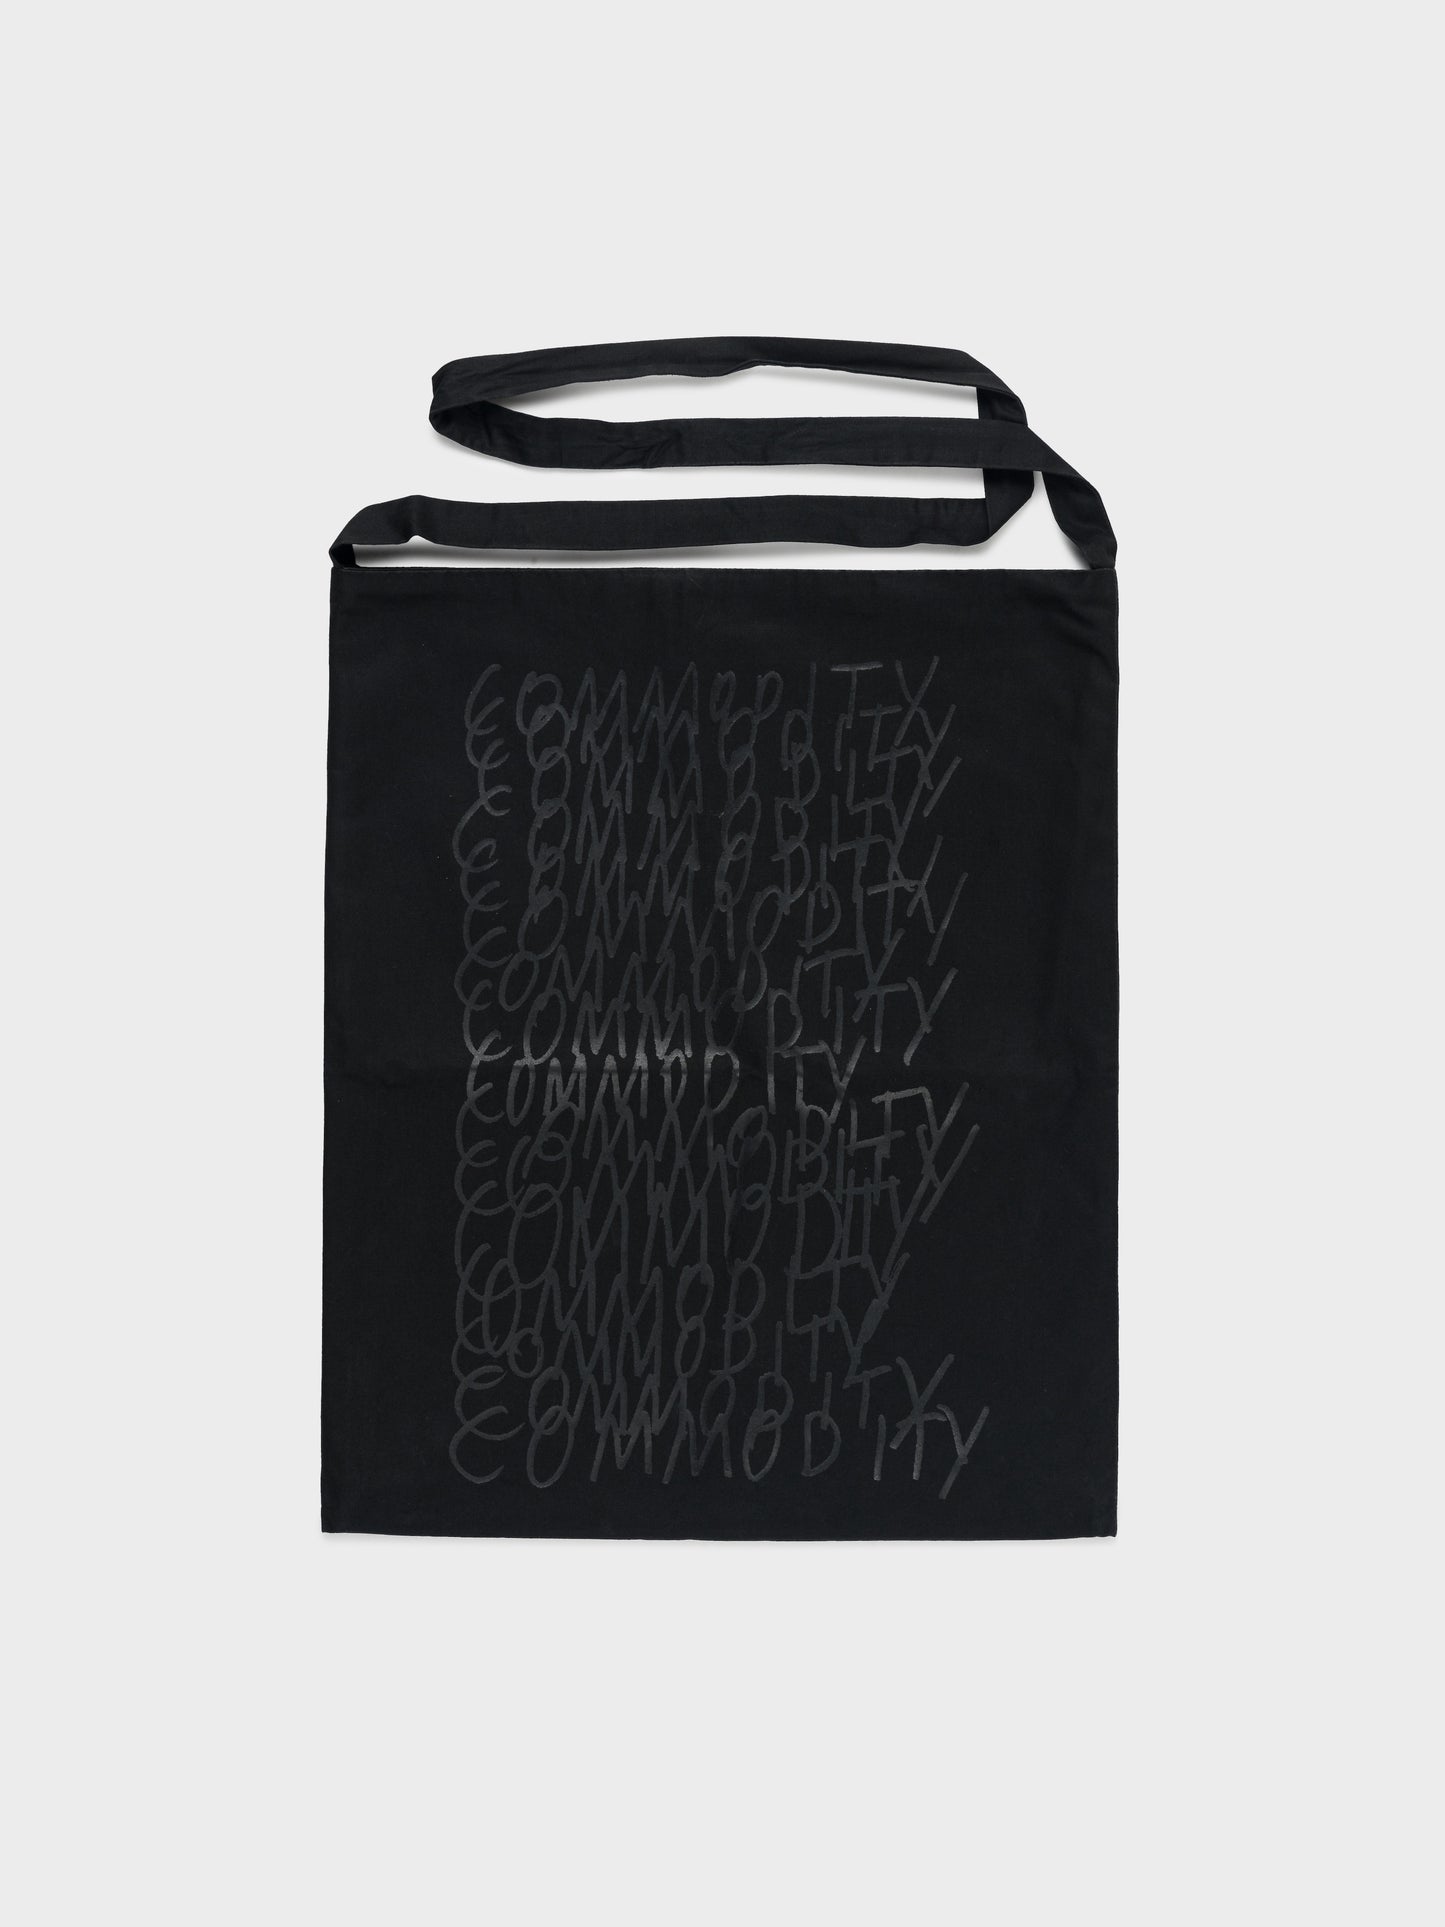 'Consumed' Commodity Tote Bag